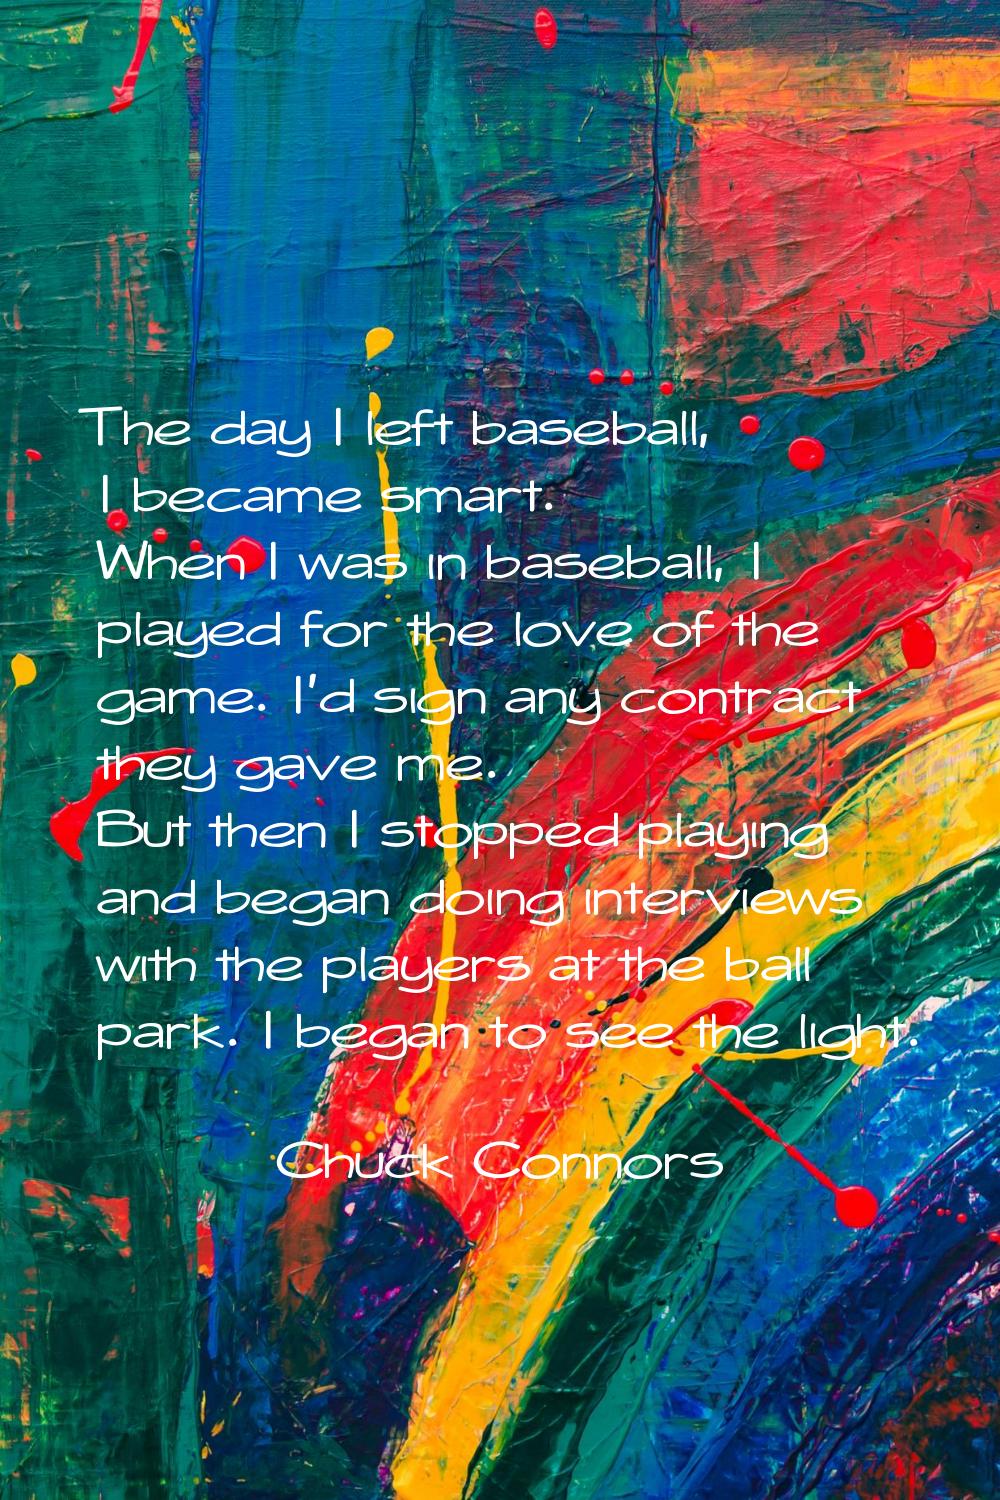 The day I left baseball, I became smart. When I was in baseball, I played for the love of the game.